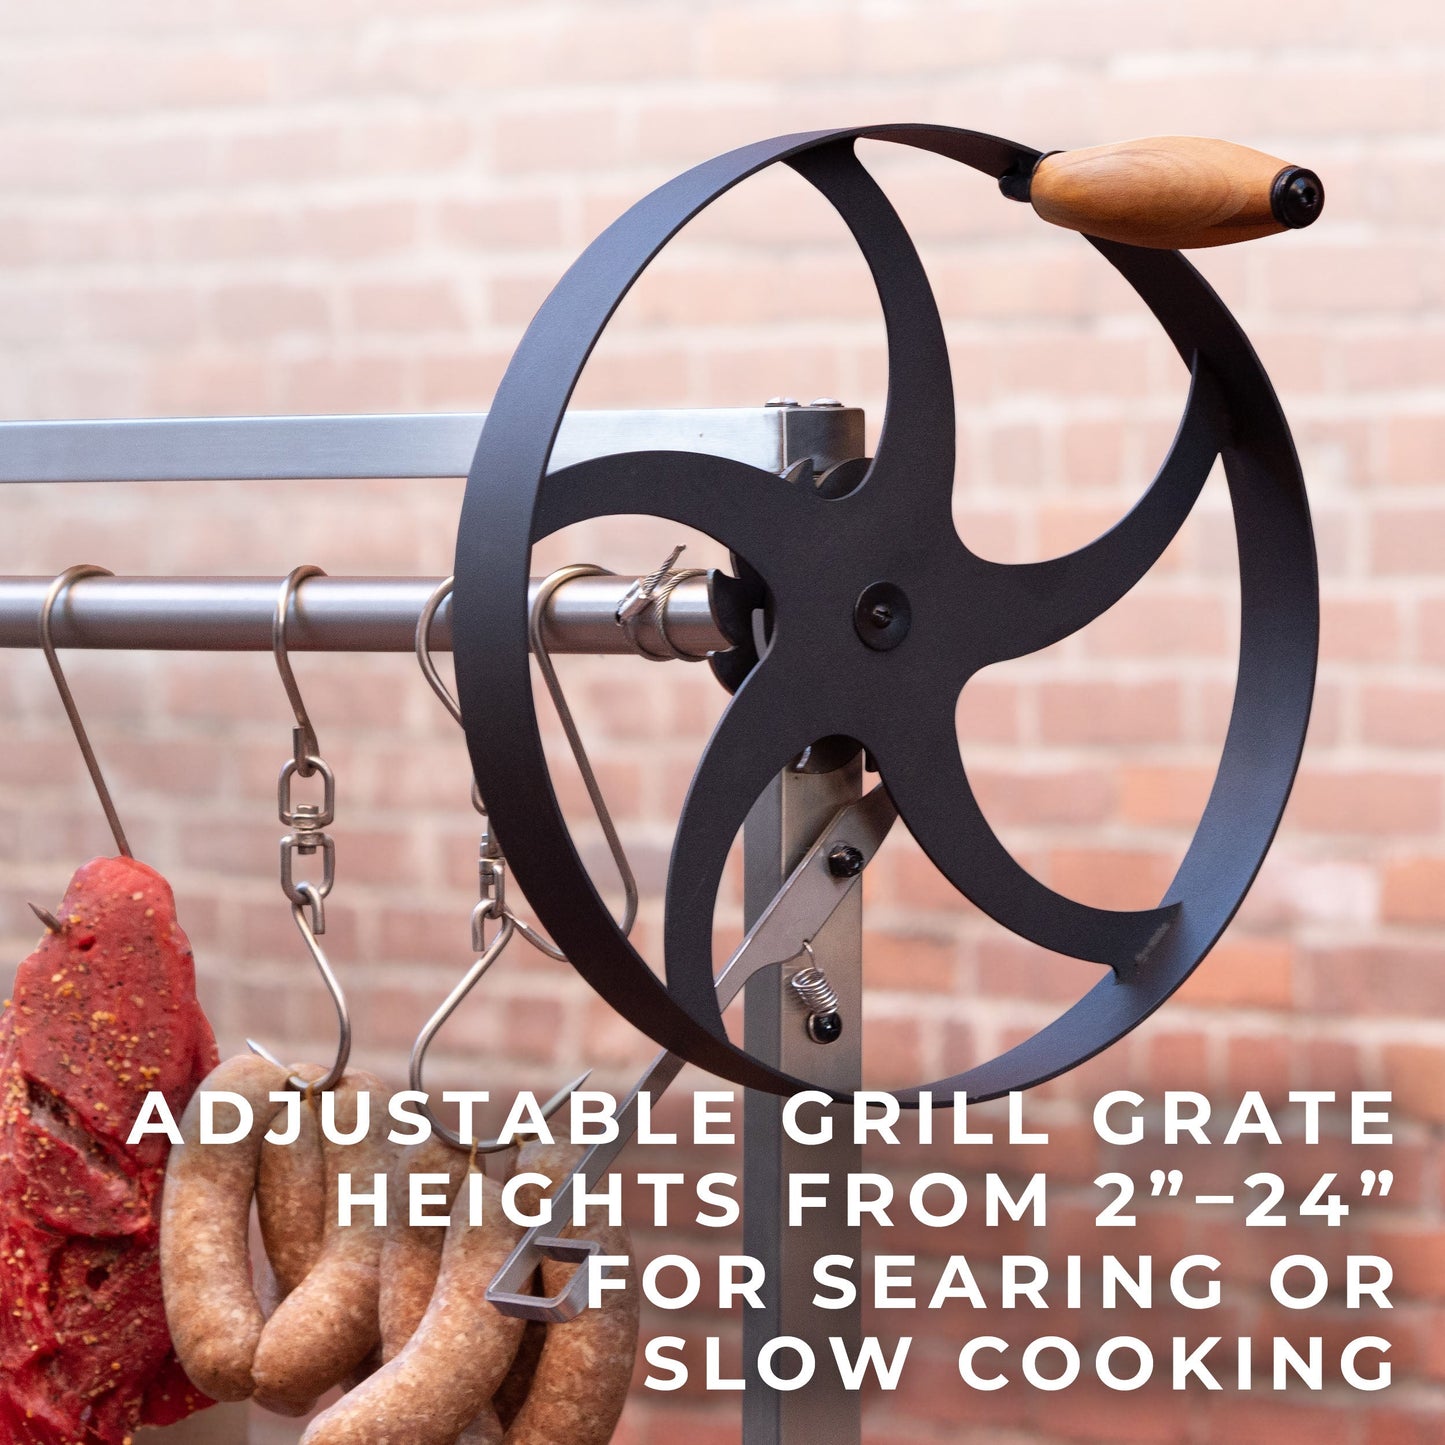 Premium Argentine/Santa Maria BBQ Grill with Wood Fire and Charcoal Grill